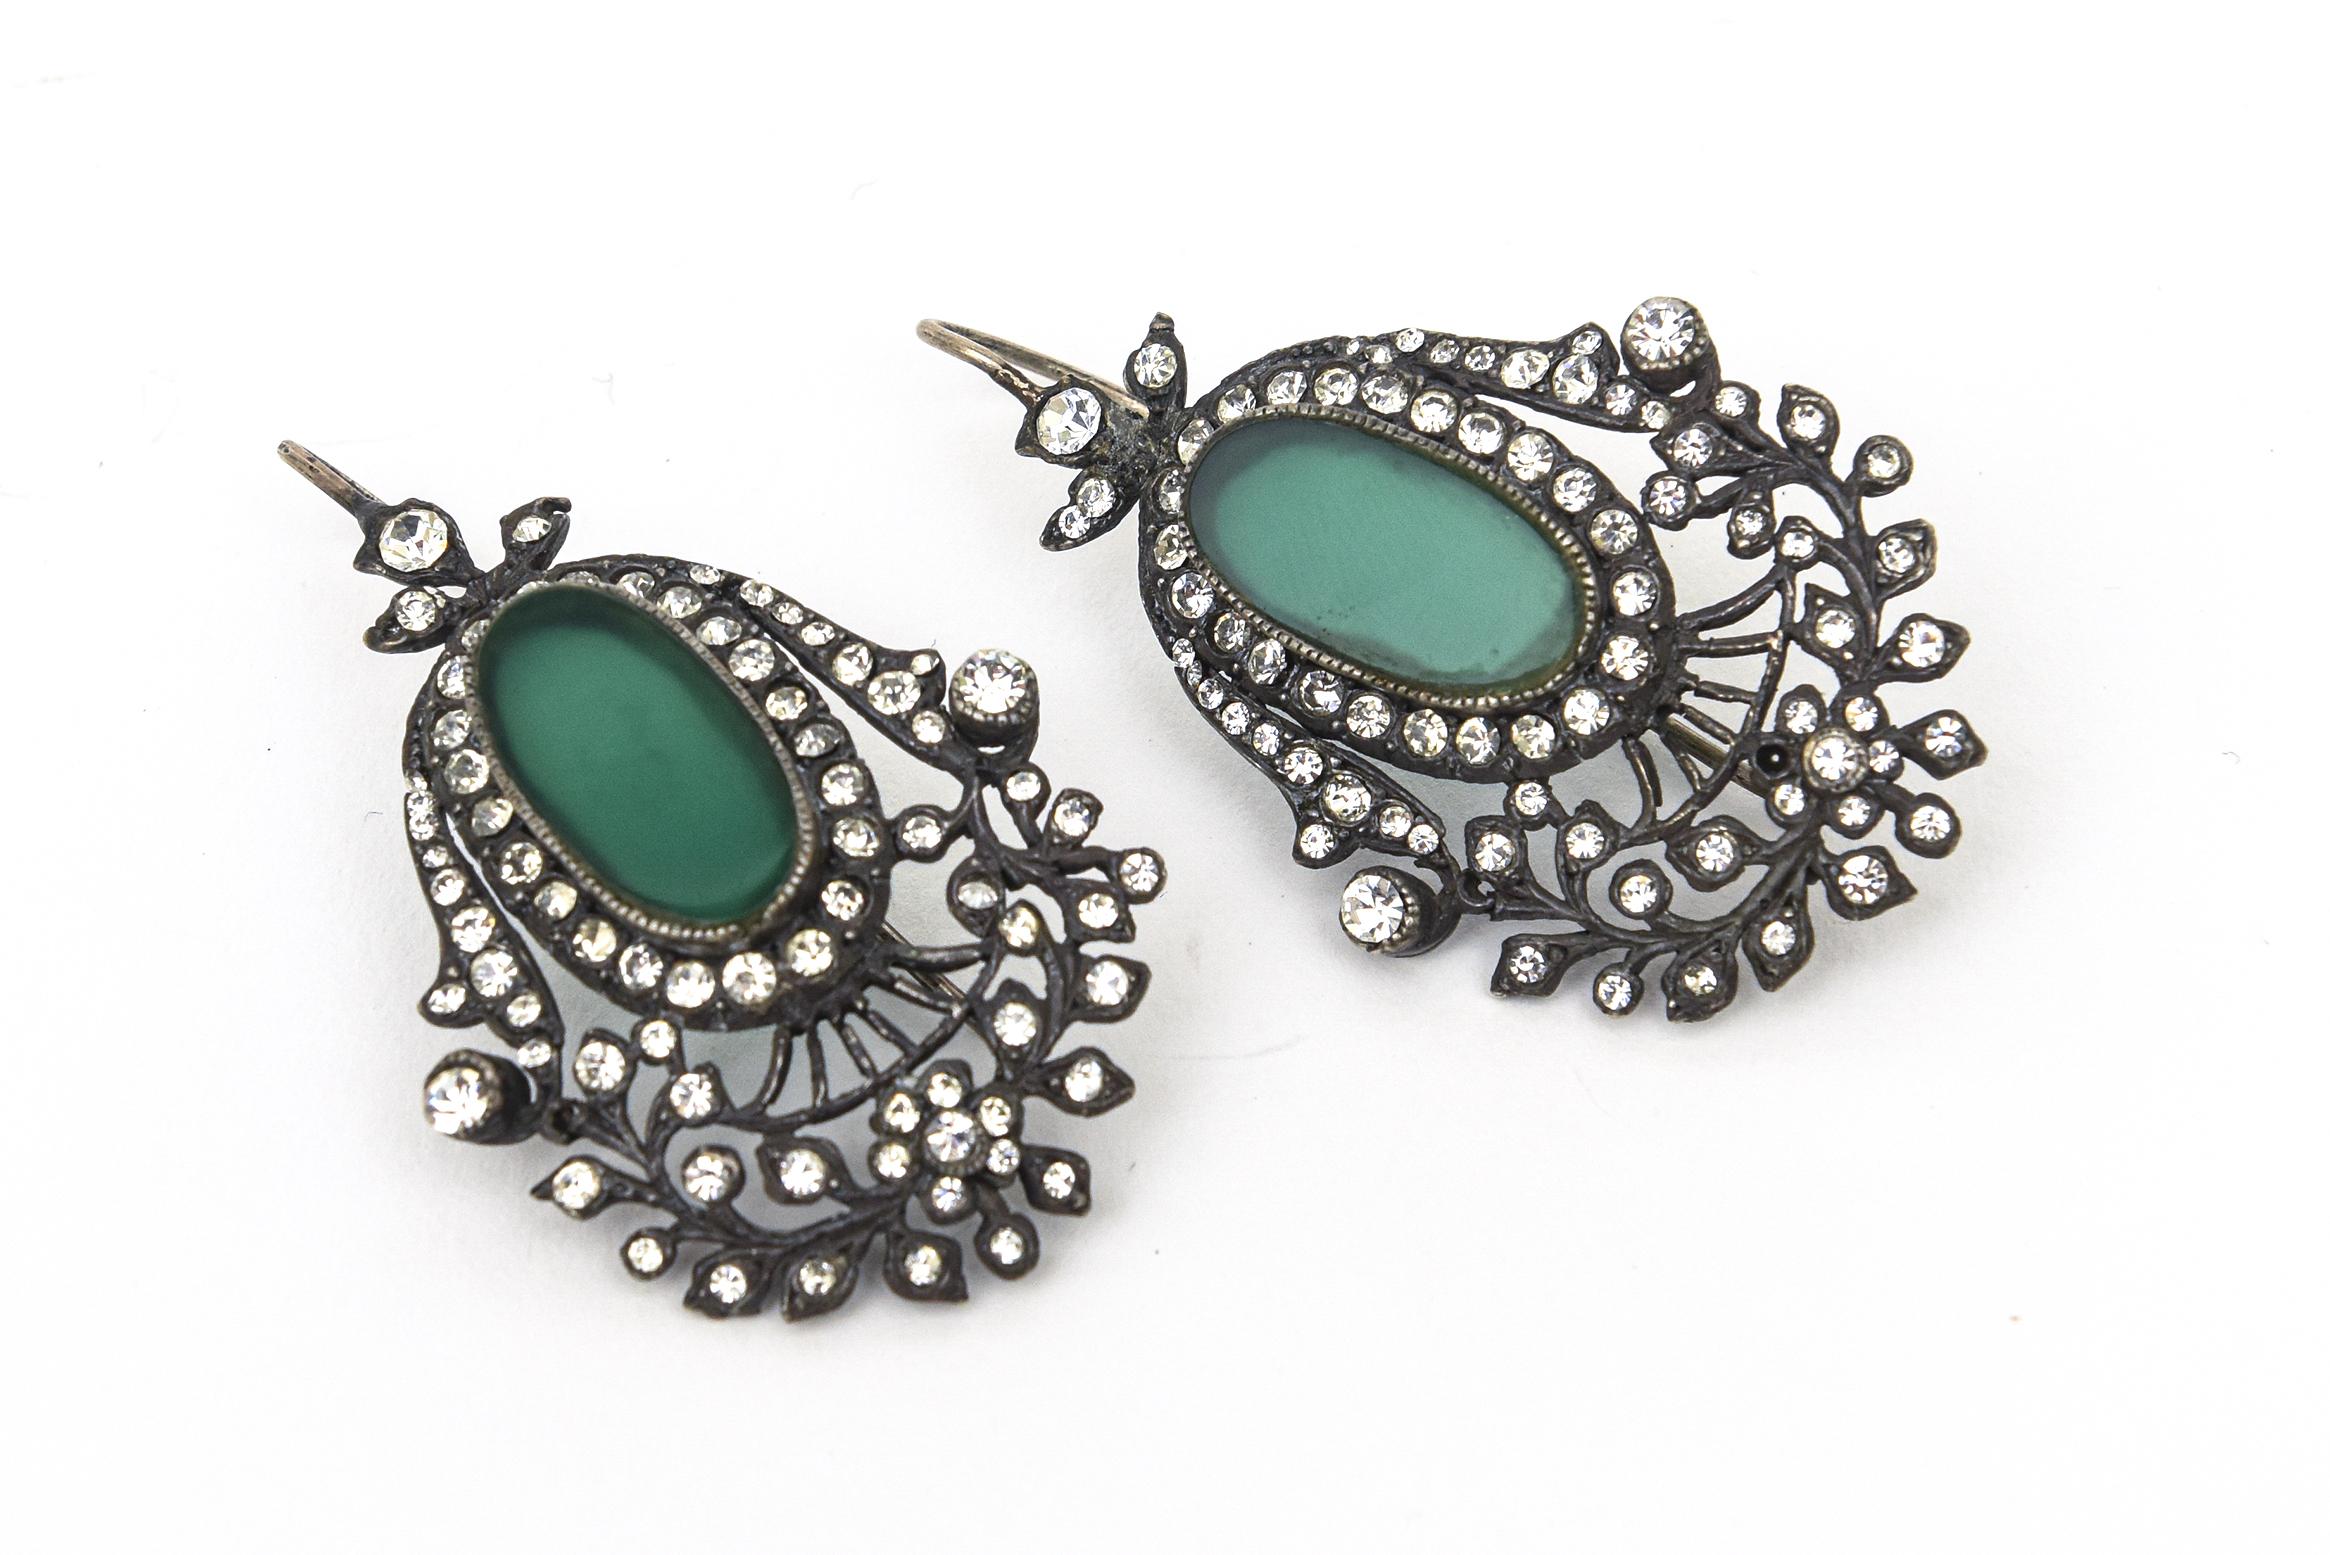 These elegant and stately vintage pierced Czech dangle earrings are rhodium plated, rhinestone interspersed, silver, and green glass.
They are from the 50's or earlier and have been in our archives for over 30 years. They have an art deco style.